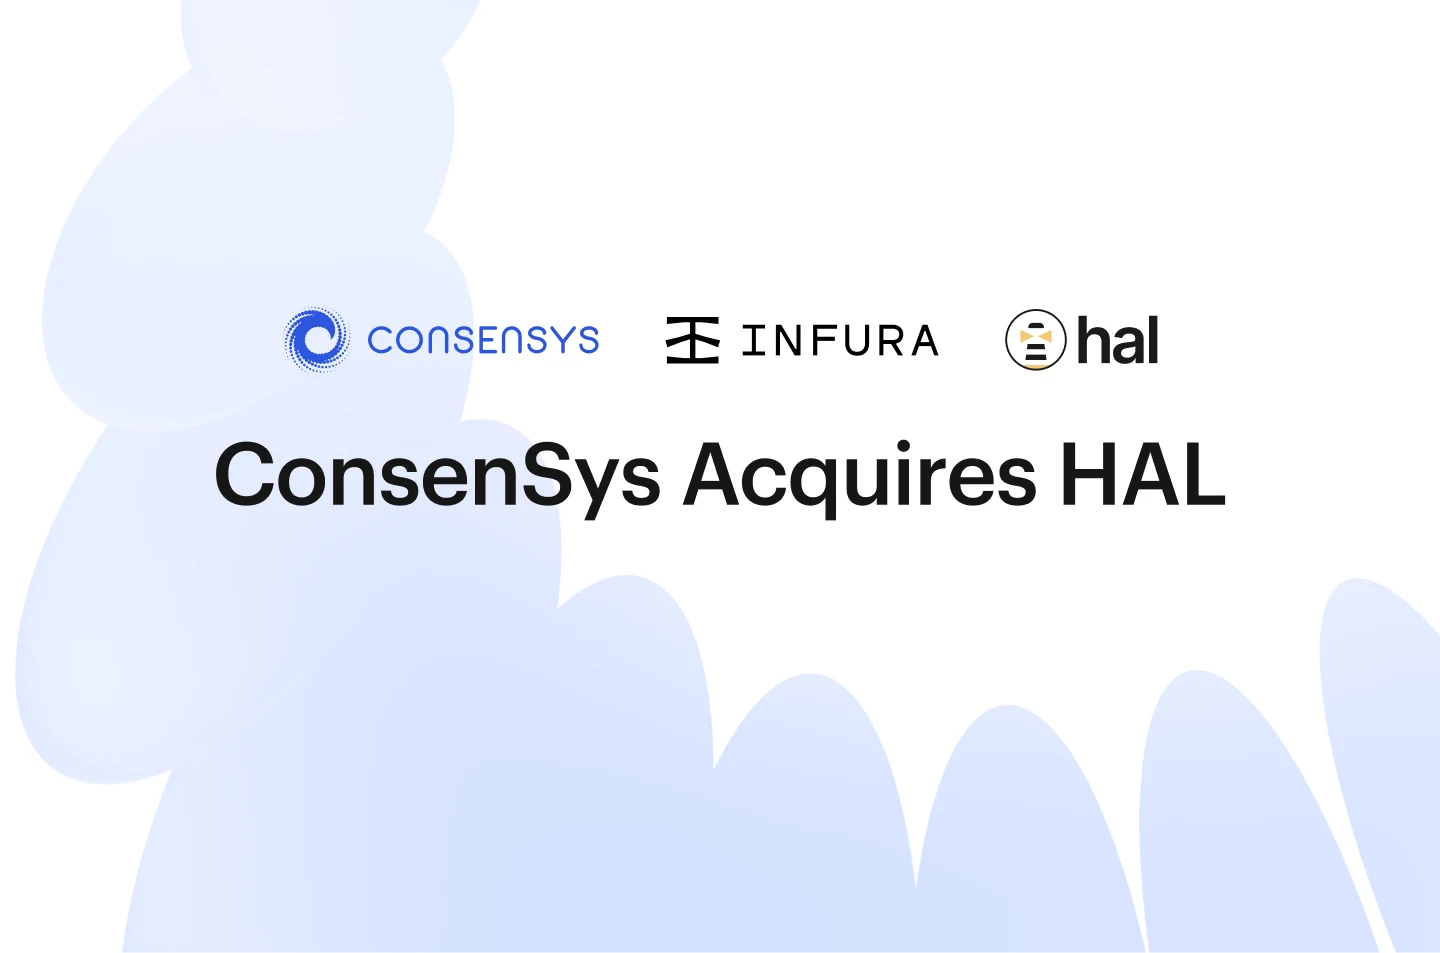 Image: Consensys Acquires HAL to Augment Infura's Blockchain Notification and Automation Capabilities